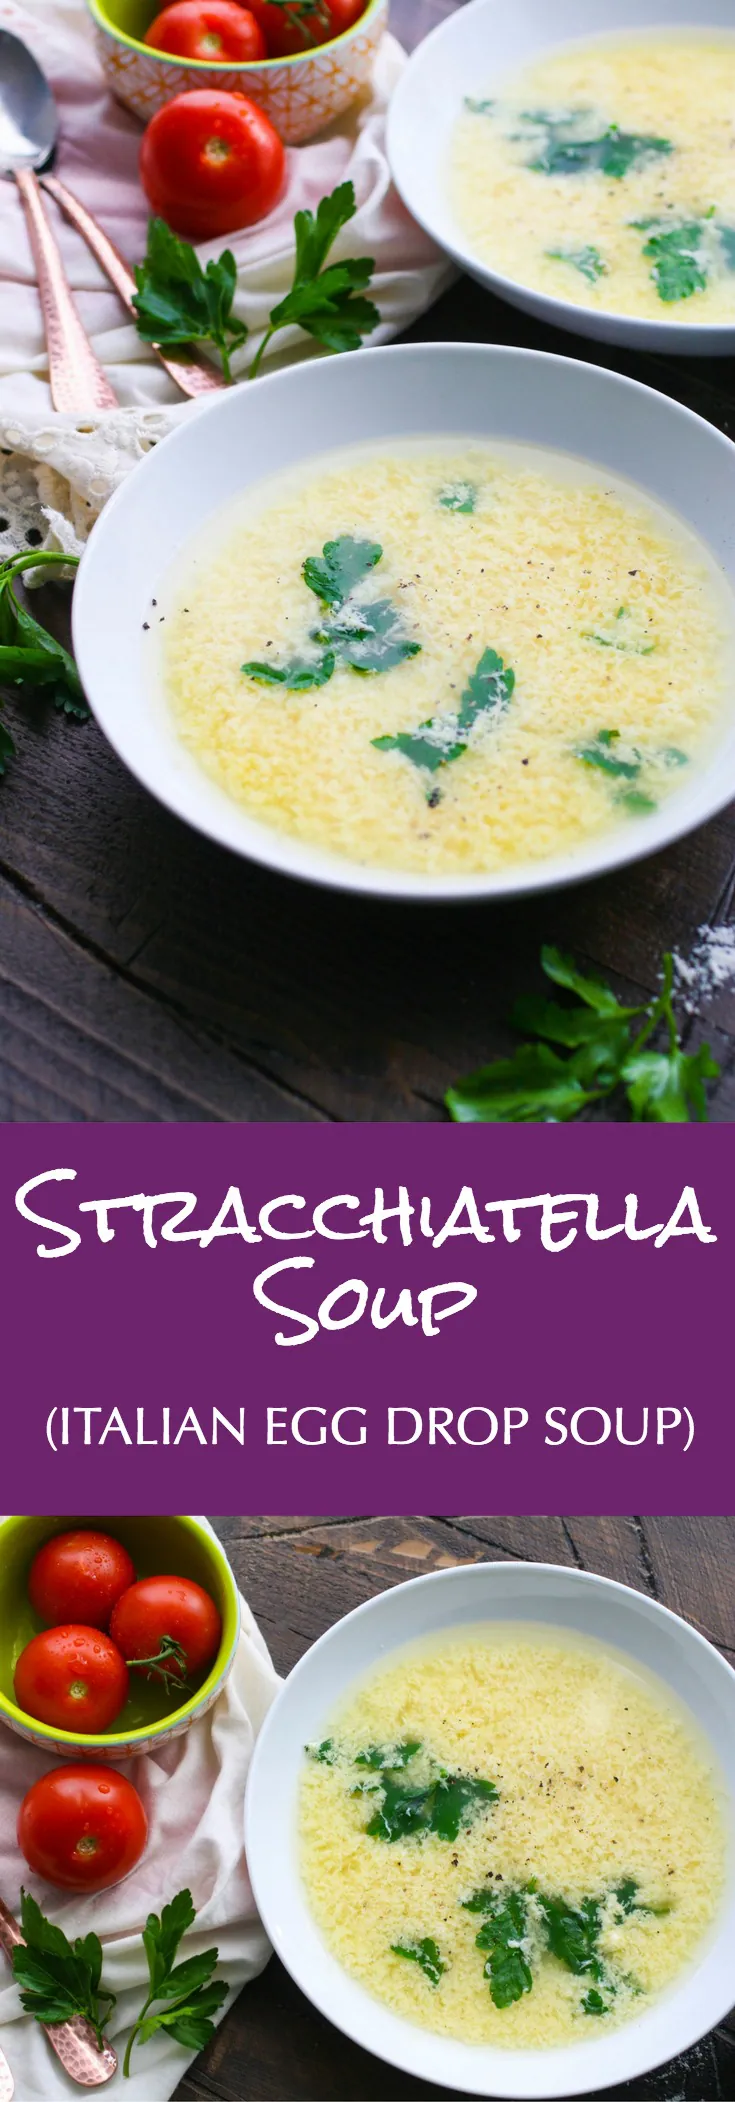 Stracchiatella soup (Italian egg drop soup) is a treat when the weather is cold out. You'll love stracchiatella soup for its simplicity. 